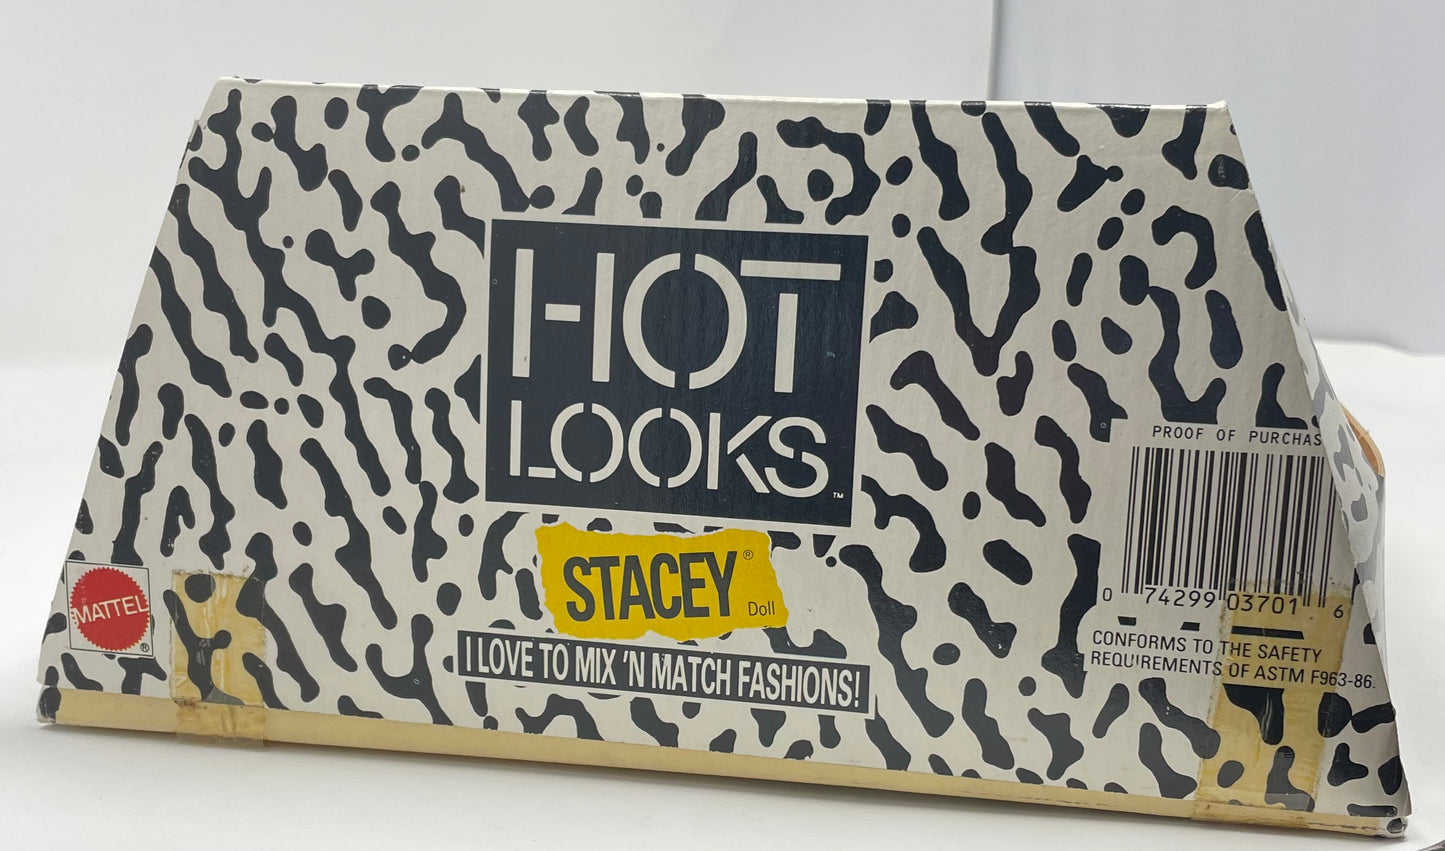 HOT LOOKS STACEY -18 INCHES TALL - #3701 - MATTEL 1986